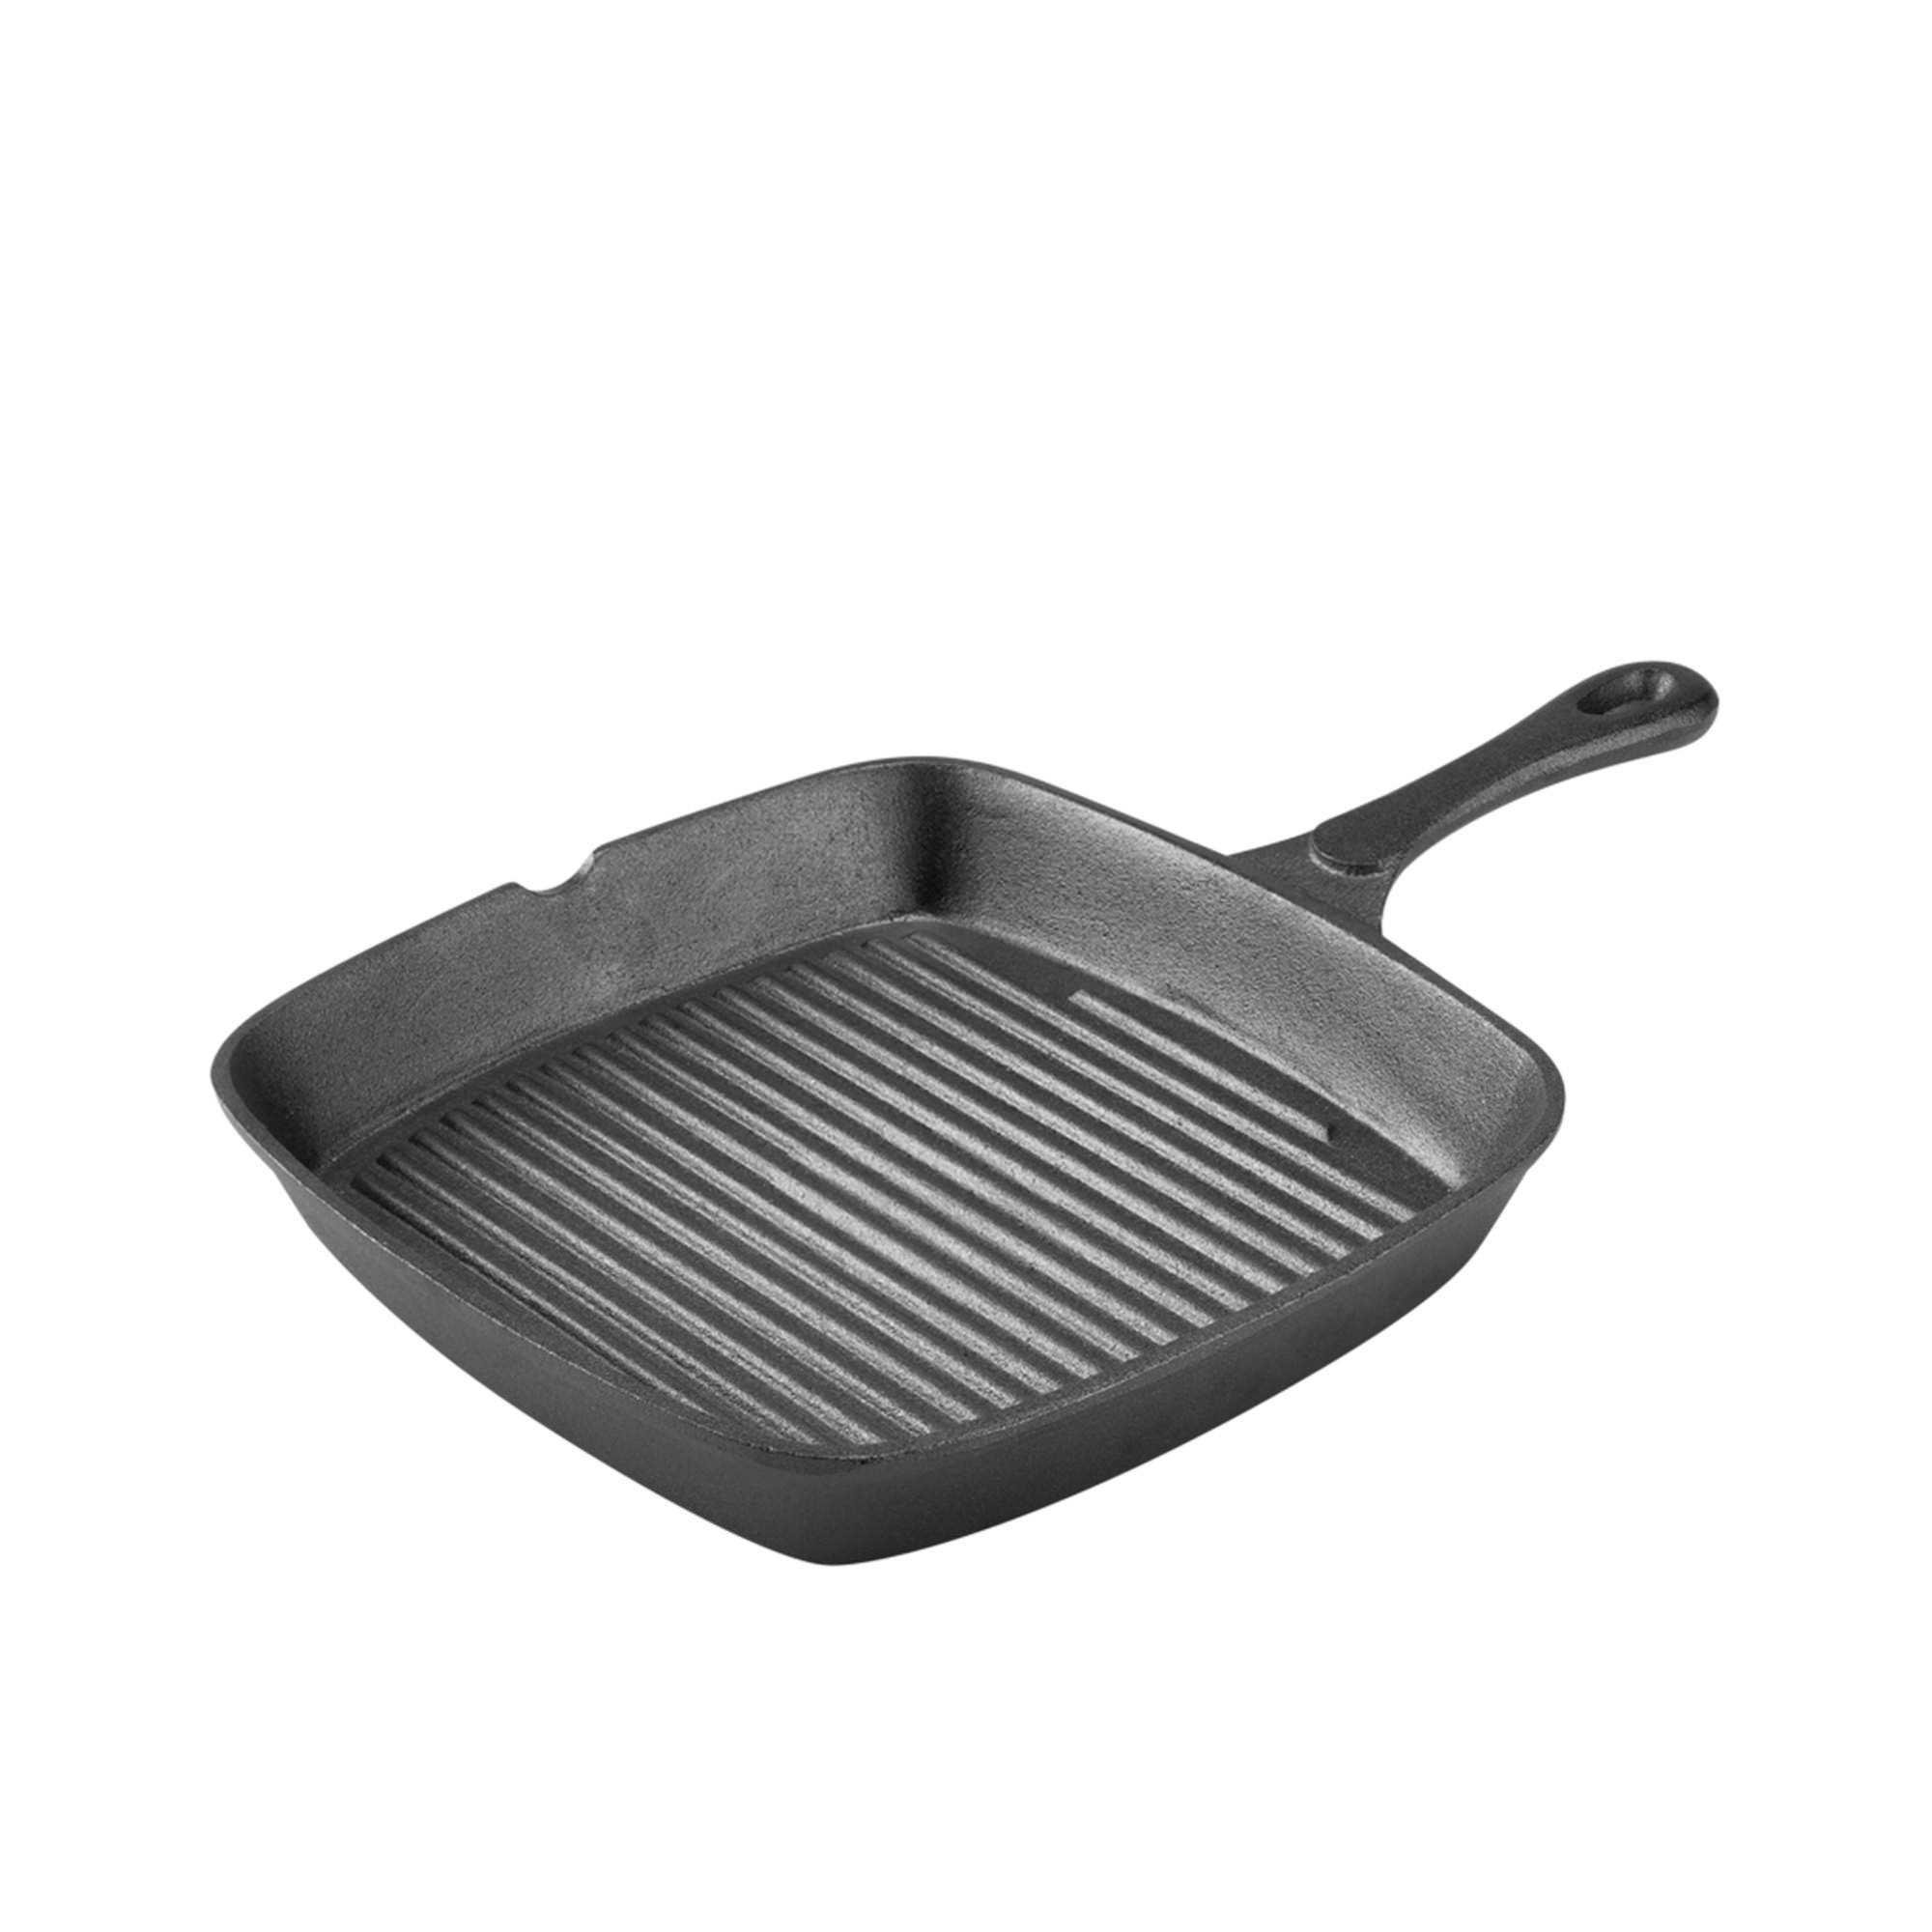 Pyrolux Pyrocast Cast Iron Square Grill Pan 25x24x3.5cm Image 1